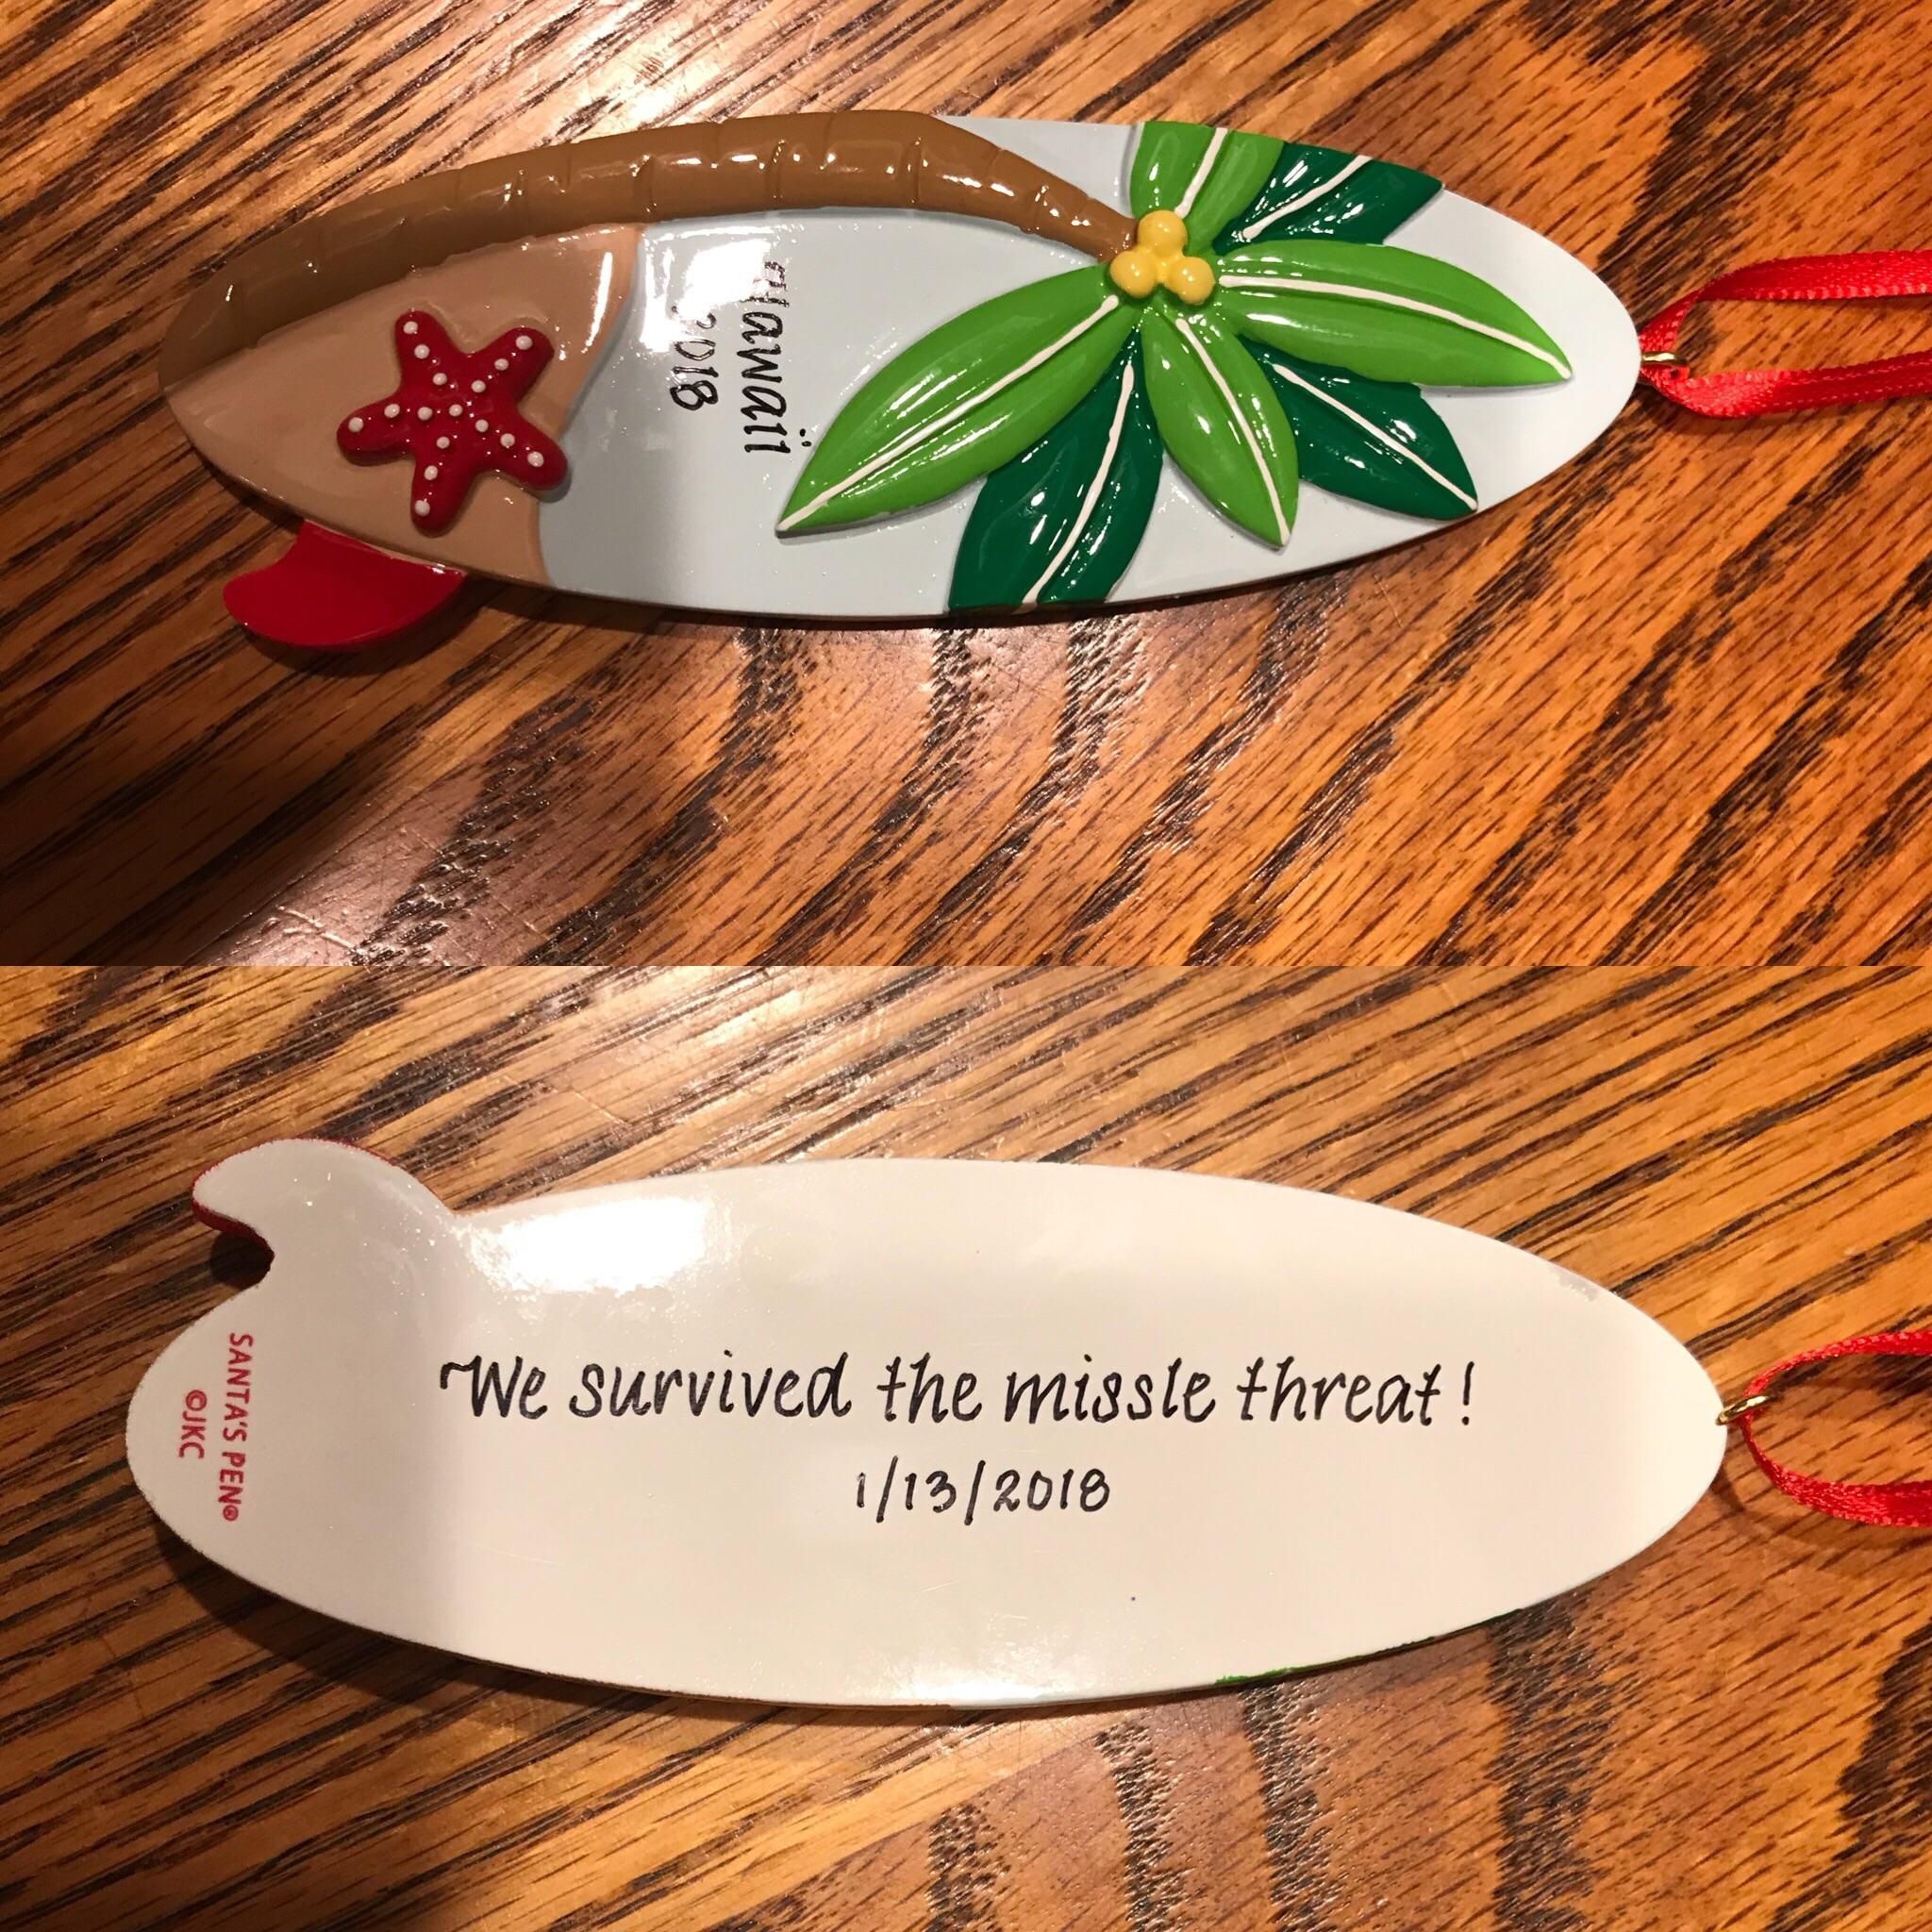 Picked my parents up at the airport last night after a vacation in Hawaii. They bought a new Christmas ornament for their trip.